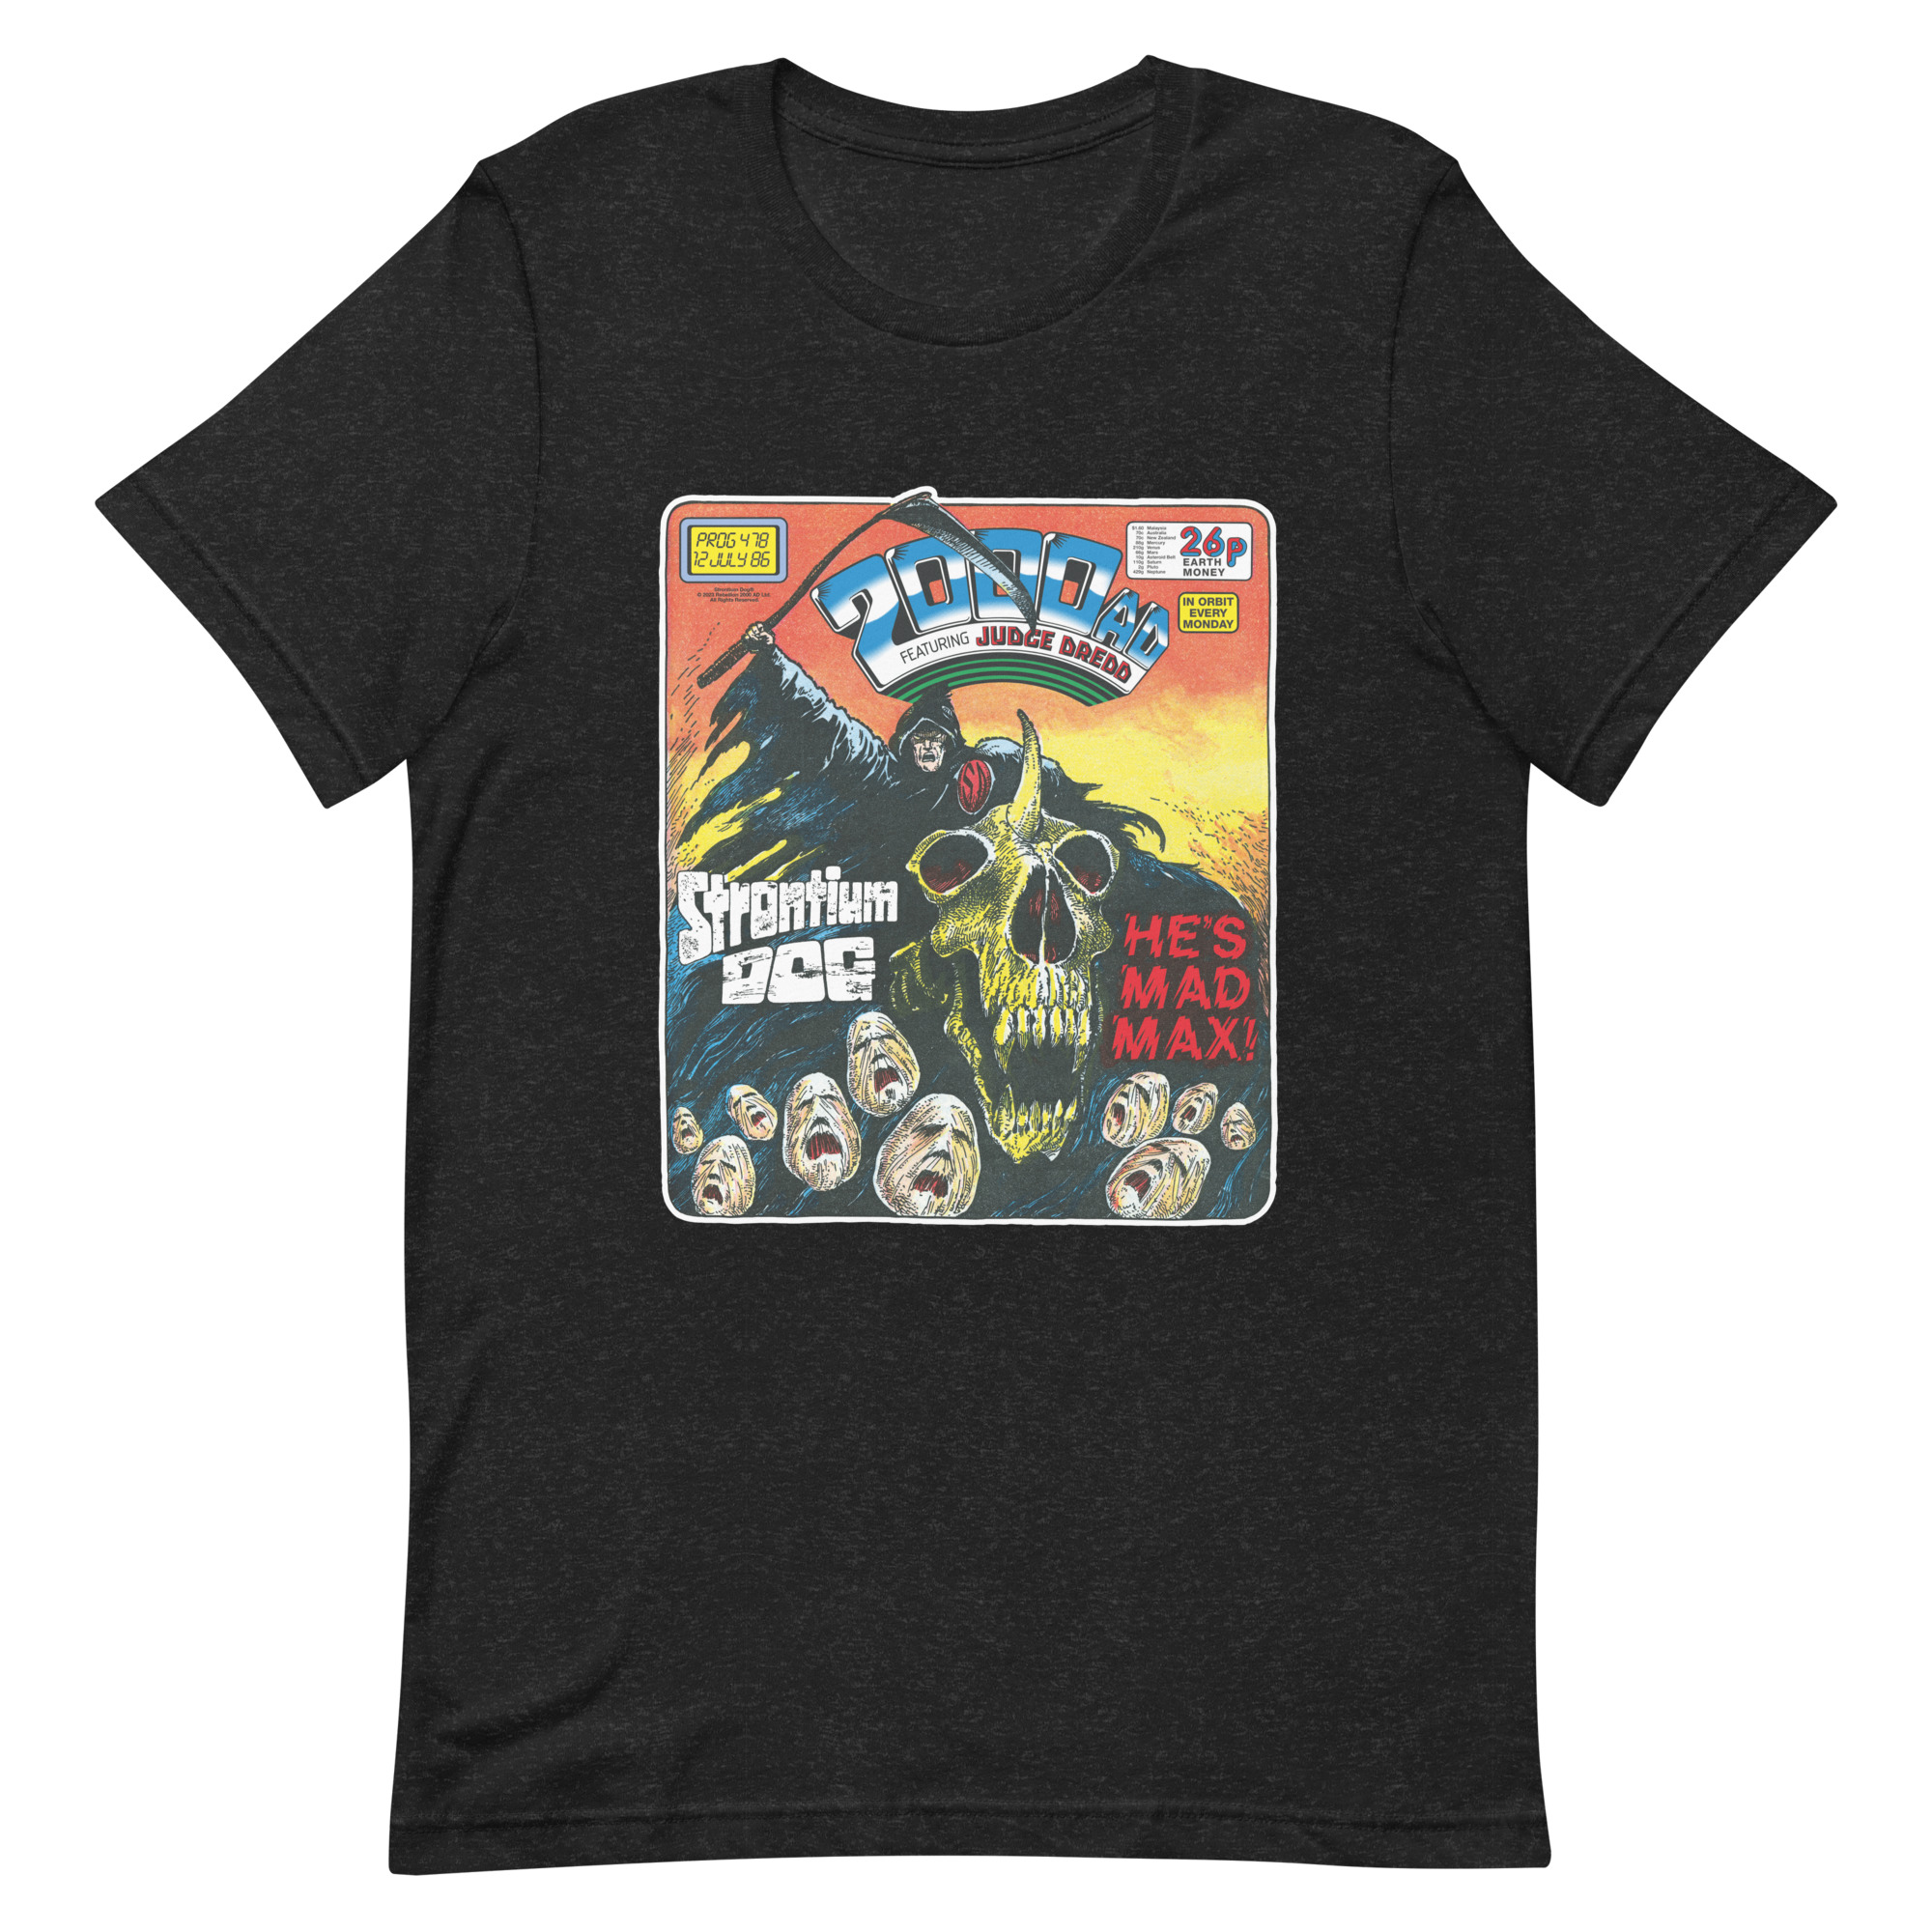 Black Tshirt with an image on the chest. Image is cover of 2000 AD Prog 478 and depicts a man in a black hood, ragged cape and atop at horned skeleton beast while holding aloft a scythe above a sea of tormented faces! Metal.